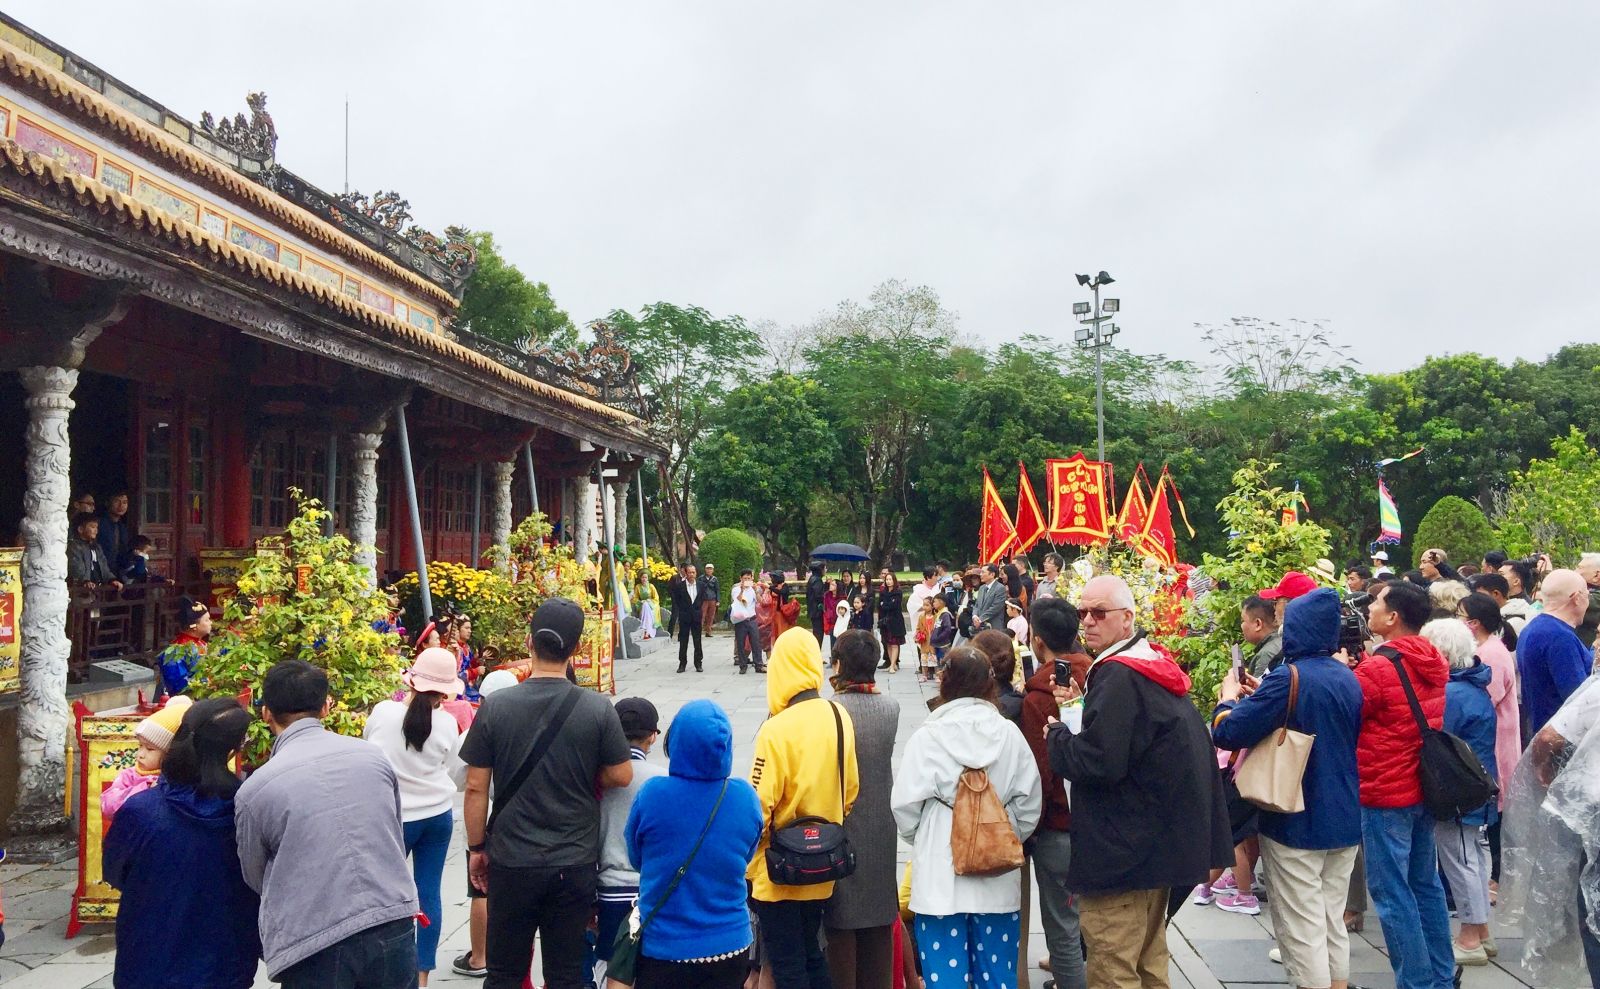 Visitors gathered in front of Thai Hoa palace even before the performances took place